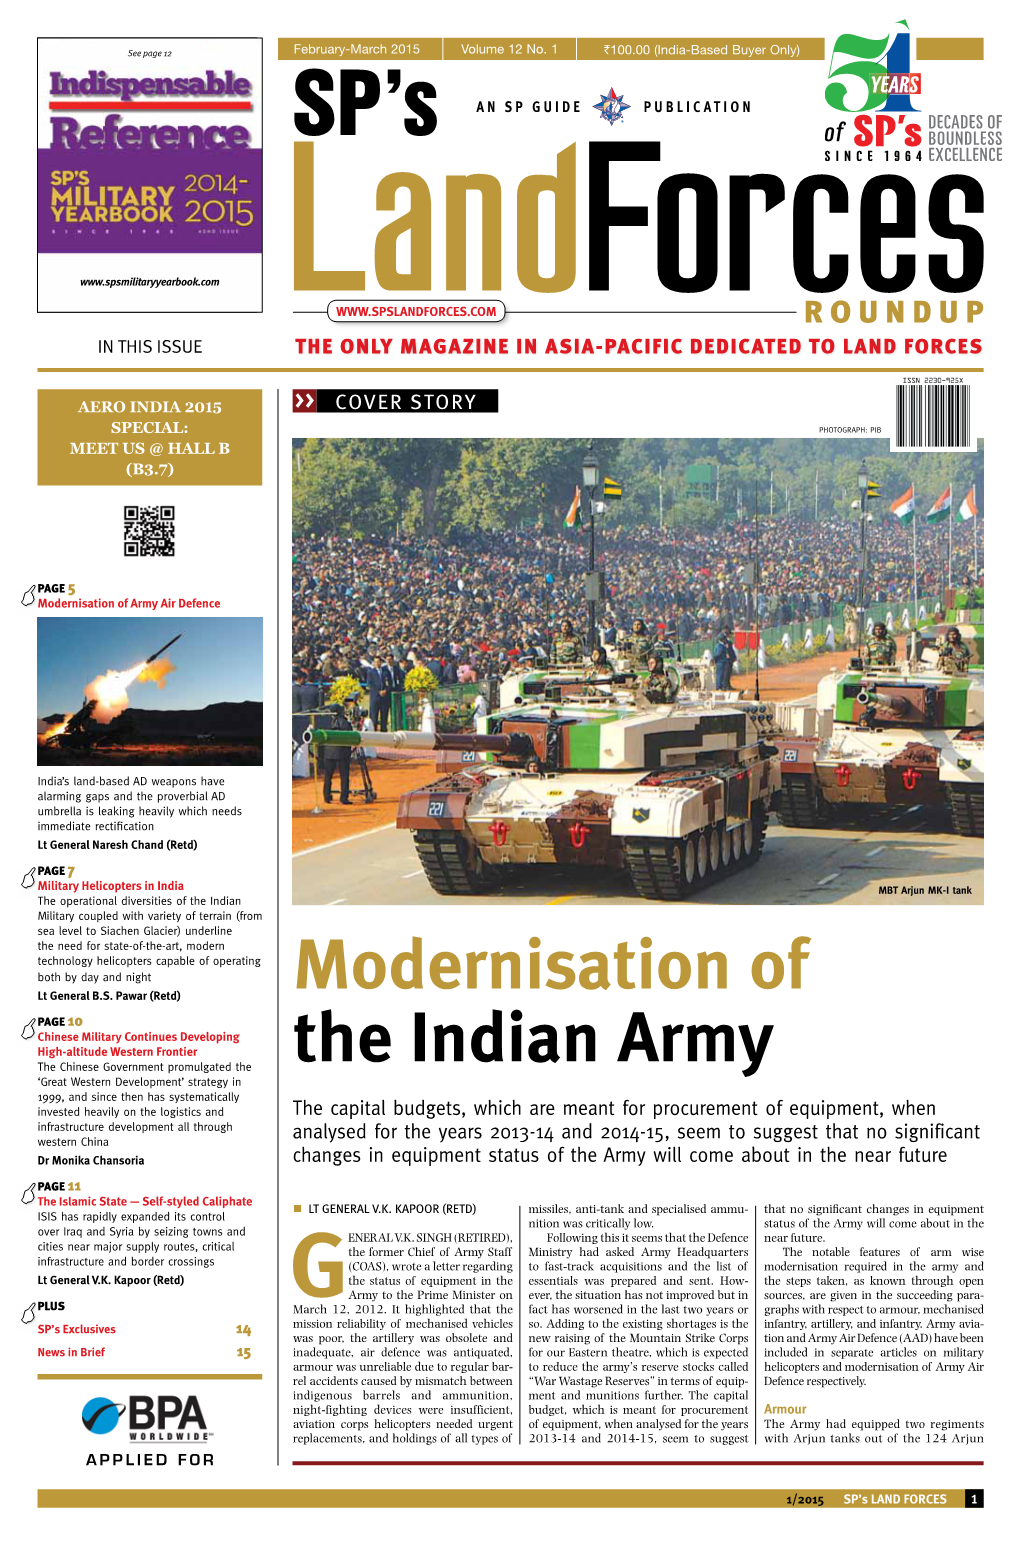 Modernisation of the Indian Army